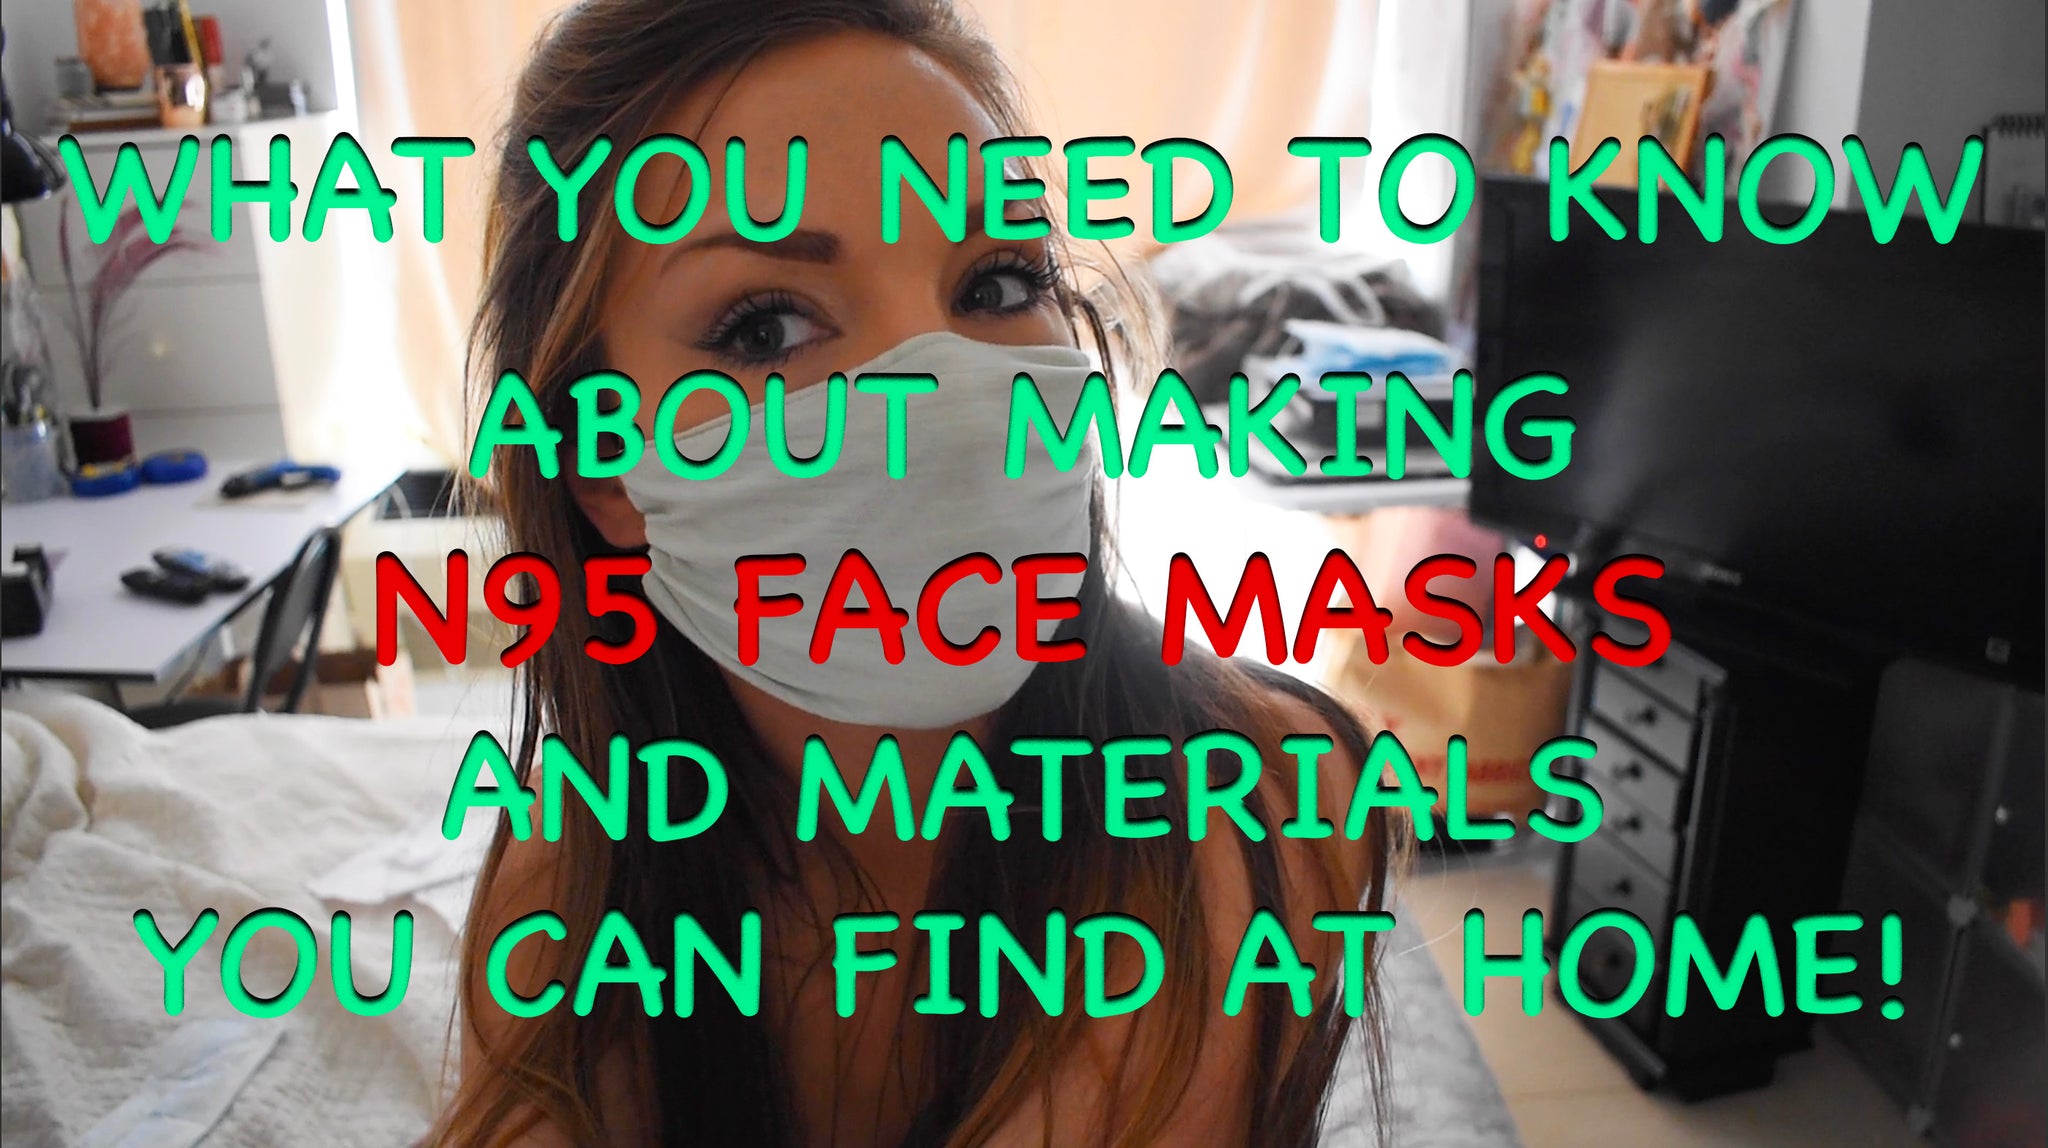 Make N95 Face Mask out of scientifically tested household material pic